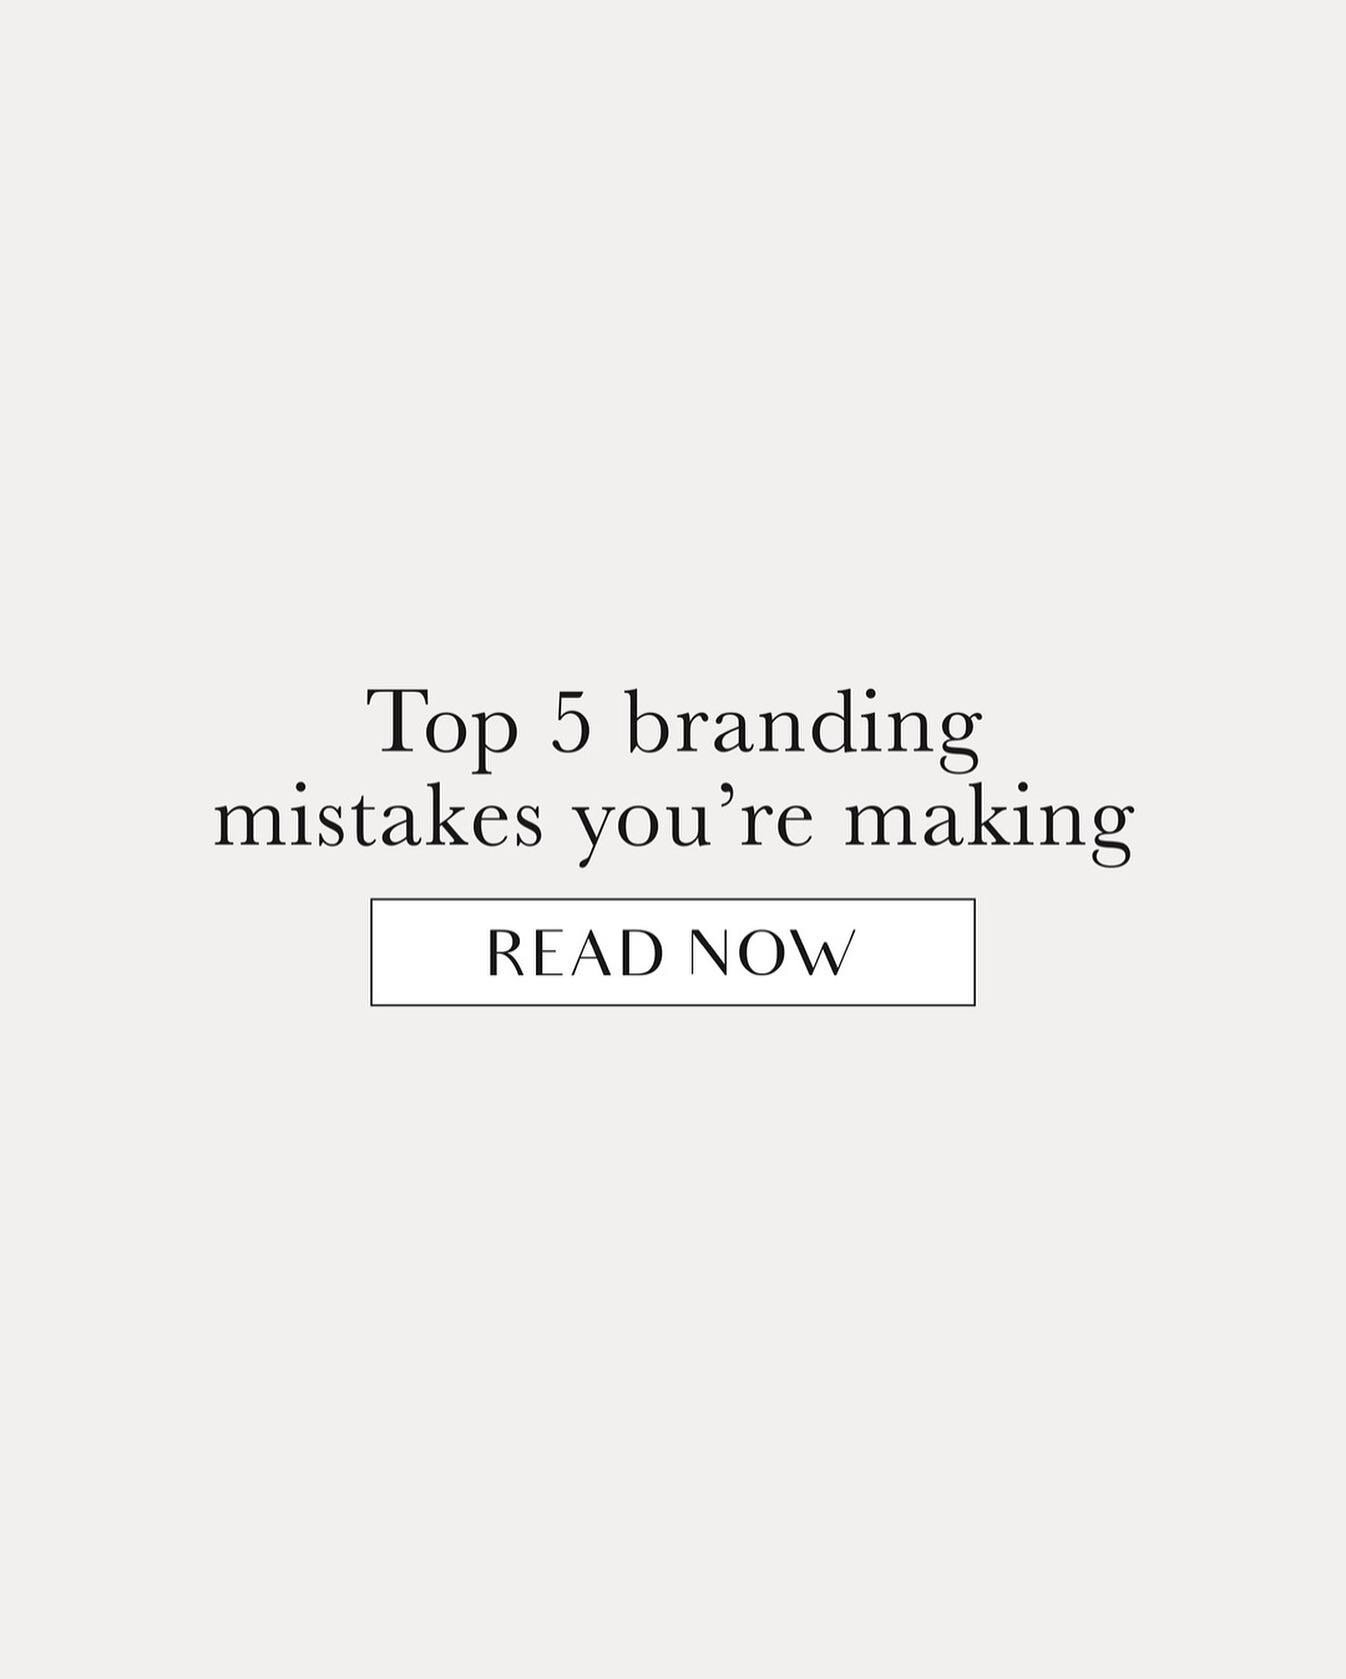 Top 5 branding mistakes you&rsquo;re making 😯
⠀⠀⠀⠀⠀⠀⠀⠀⠀
1️⃣ Not defining your brand foundation
⠀⠀⠀⠀⠀⠀⠀⠀⠀
Before you start designing anything&hellip; You need to build your brand foundation.
⠀⠀⠀⠀⠀⠀⠀⠀⠀
Start out by answering these *key* questions:
⠀⠀⠀